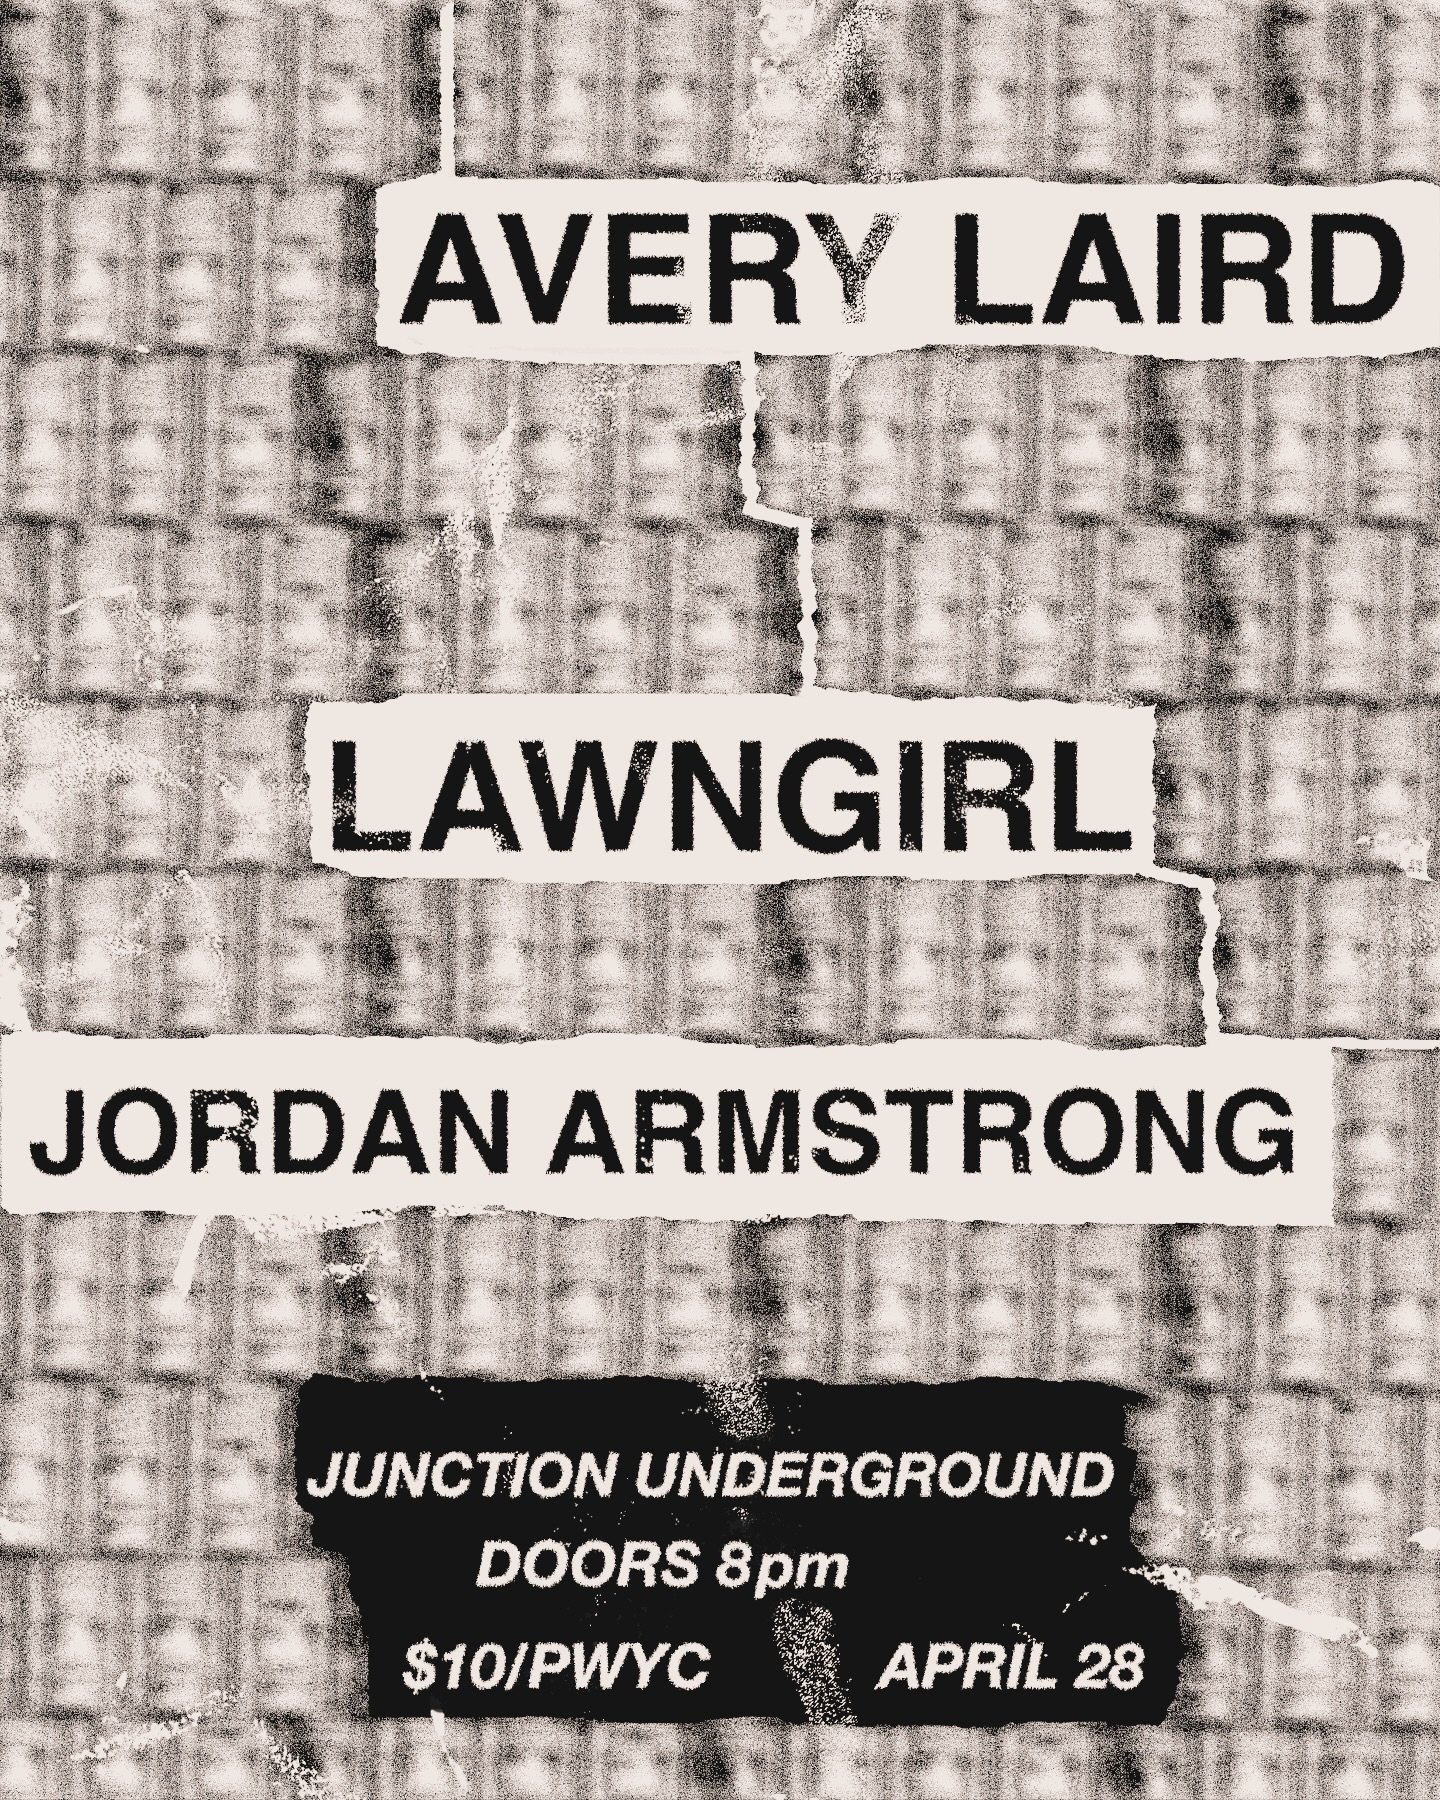 Sunday April 28th is Avery Laird with Lawngirl and Jordan Armstrong. An exciting show with lots of talent. Doors open at 8pm. $10 cover for the artists or PWYC.